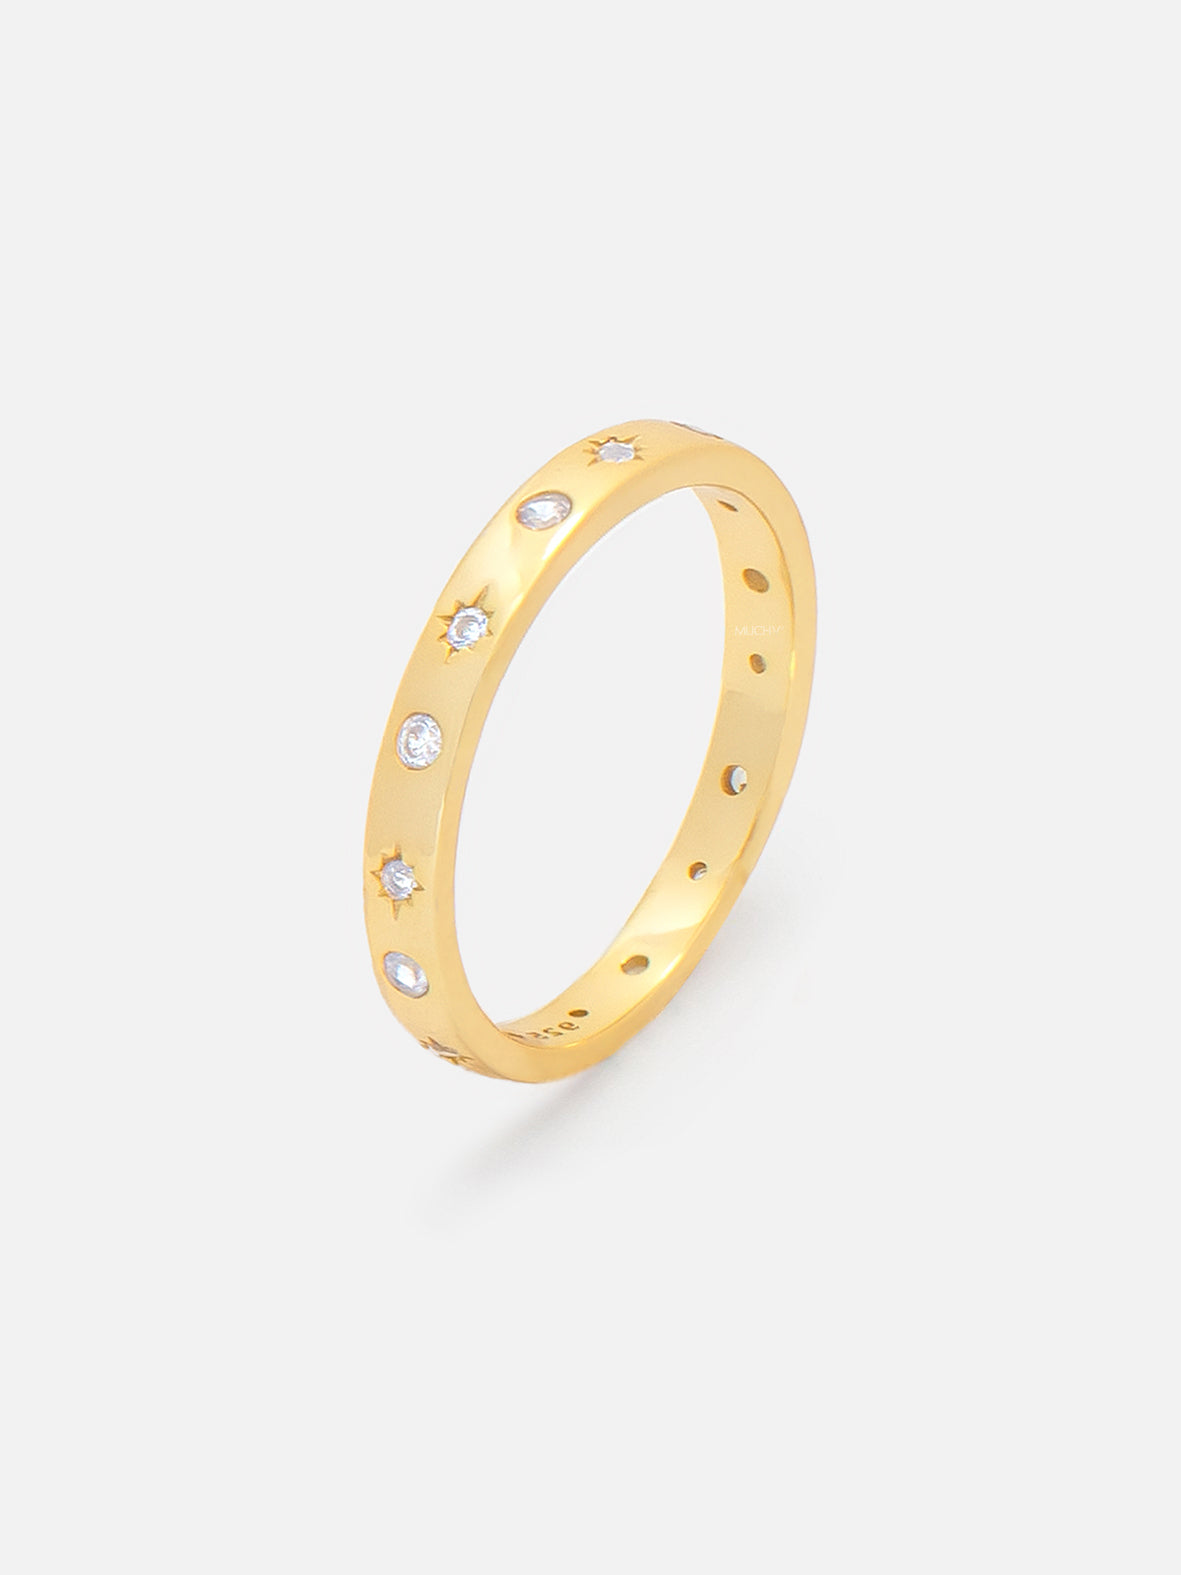 Gold Moon and Starburst Stacking Ring Band